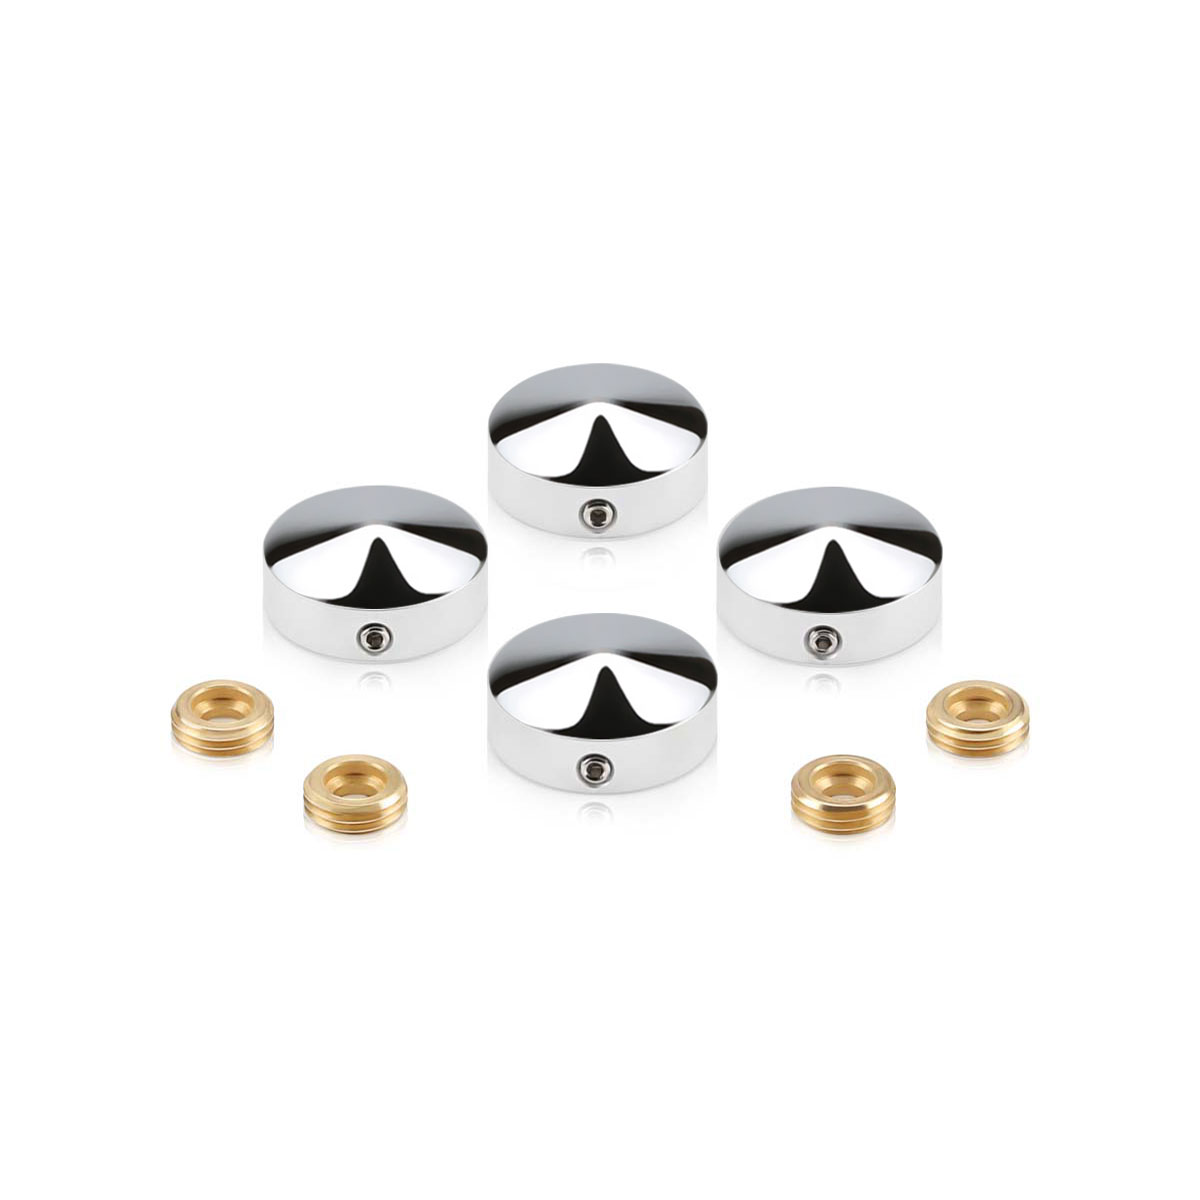 Set of 4 Conical Locking Screw Cover Diameter 7/8'', Polished Stainless Steel Finish (Indoor or Outdoor)